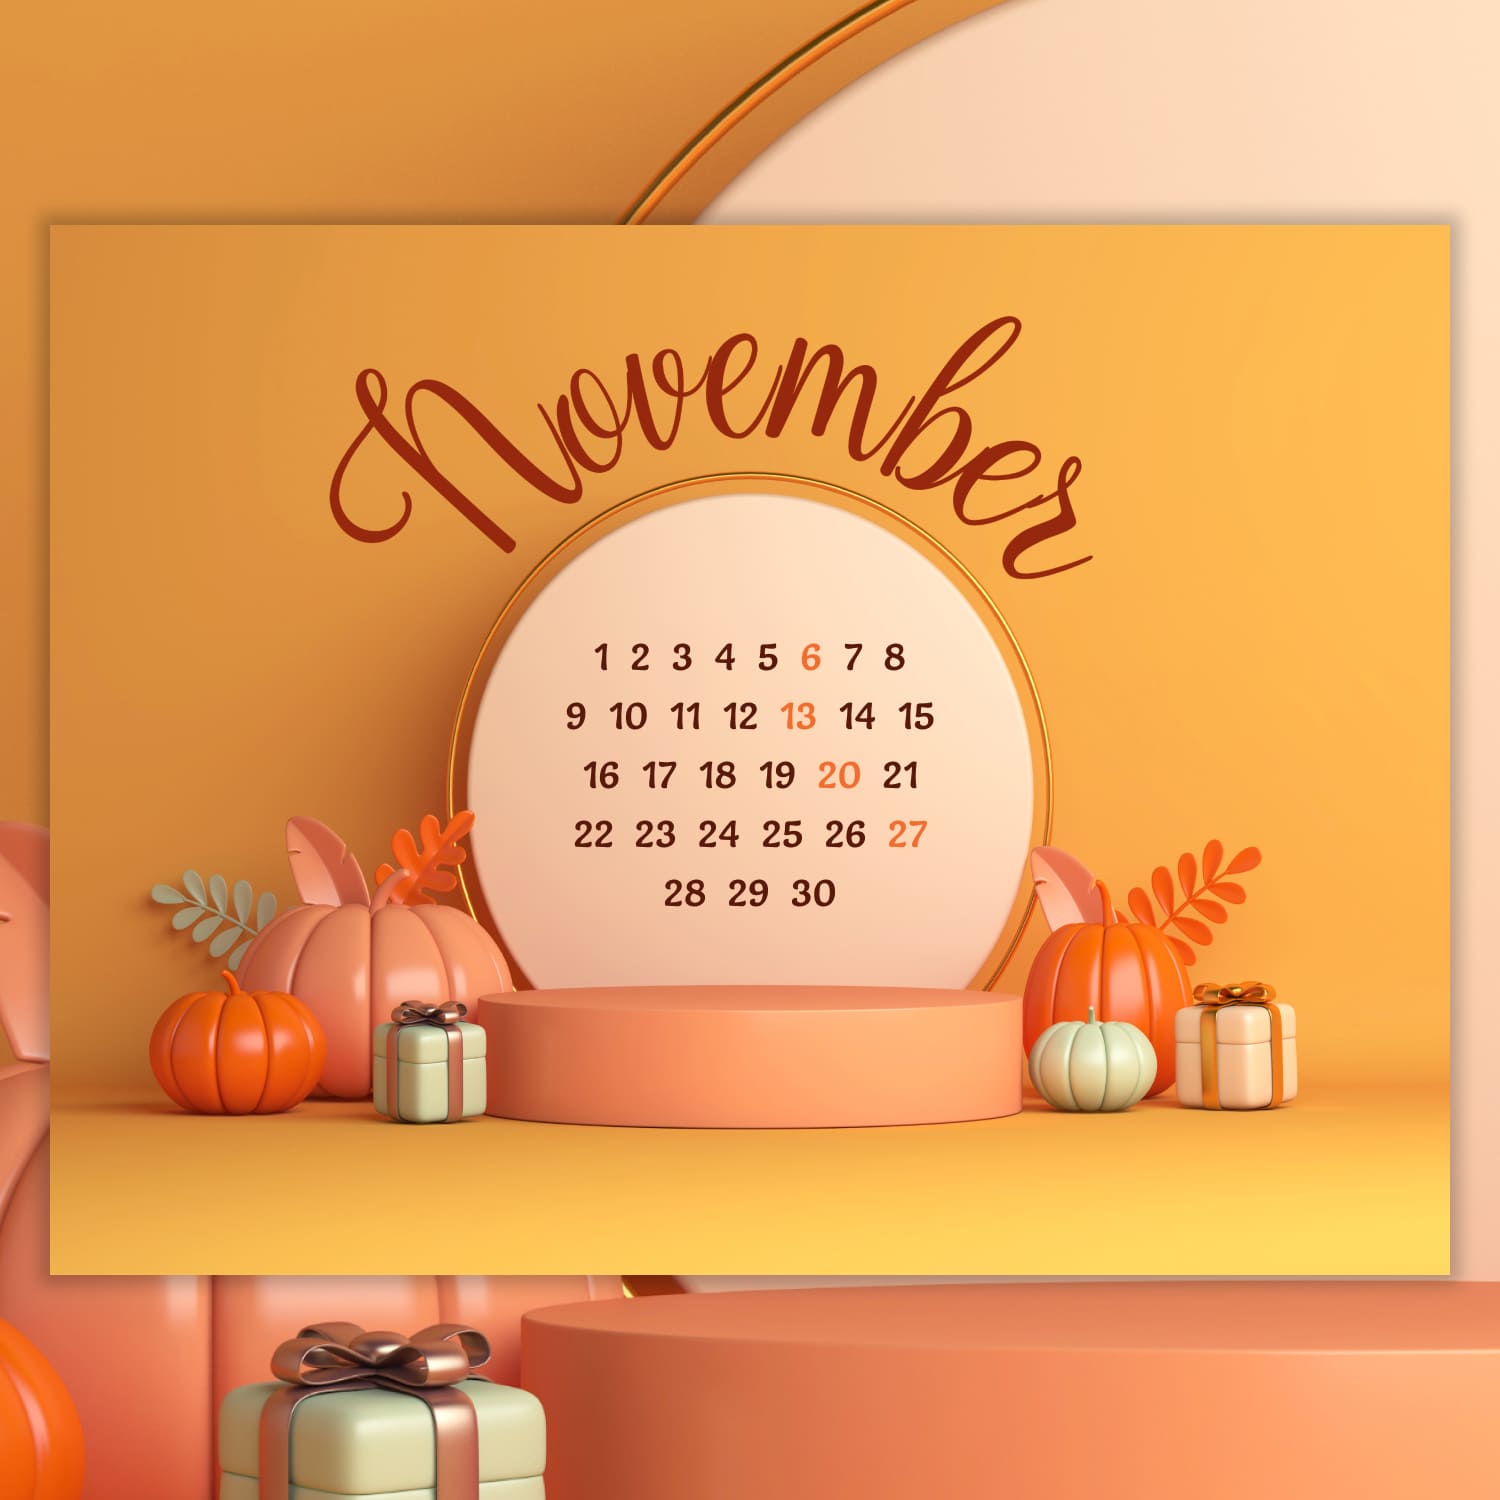 Opening with a round free November calendar in yellow colors.